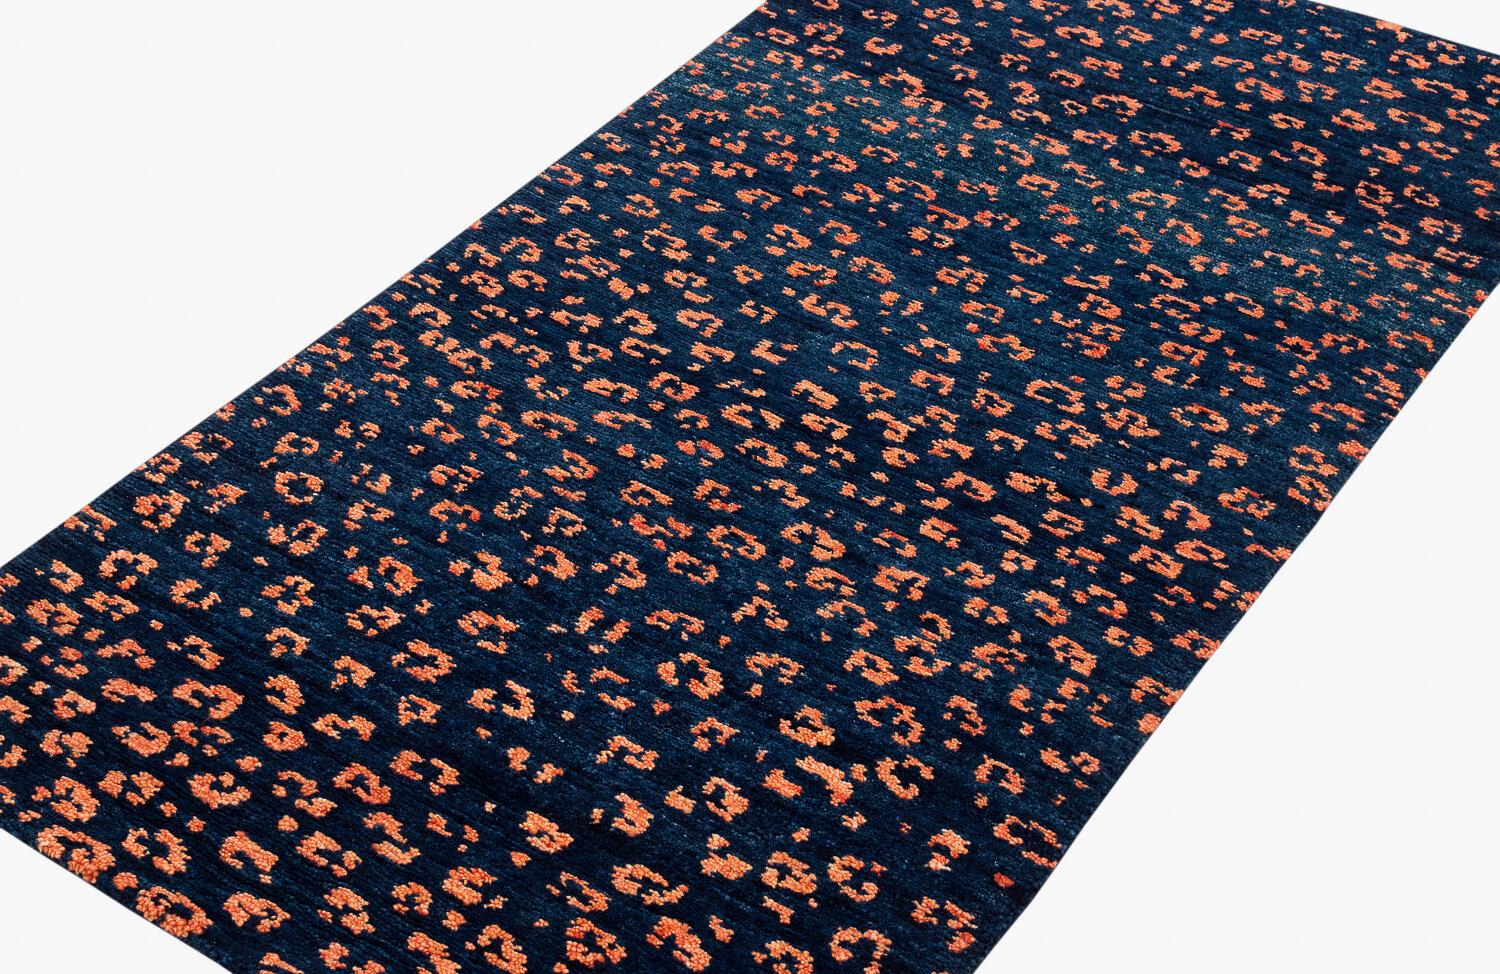 A deep indigo contrasts against the orange spots in this leopard print design. Handwoven in handspun Himalayan wool, Joseph Carini was inspired by the markings on one of the most majestic and elusive wild creatures, in a versatile 3' x 6' size, it